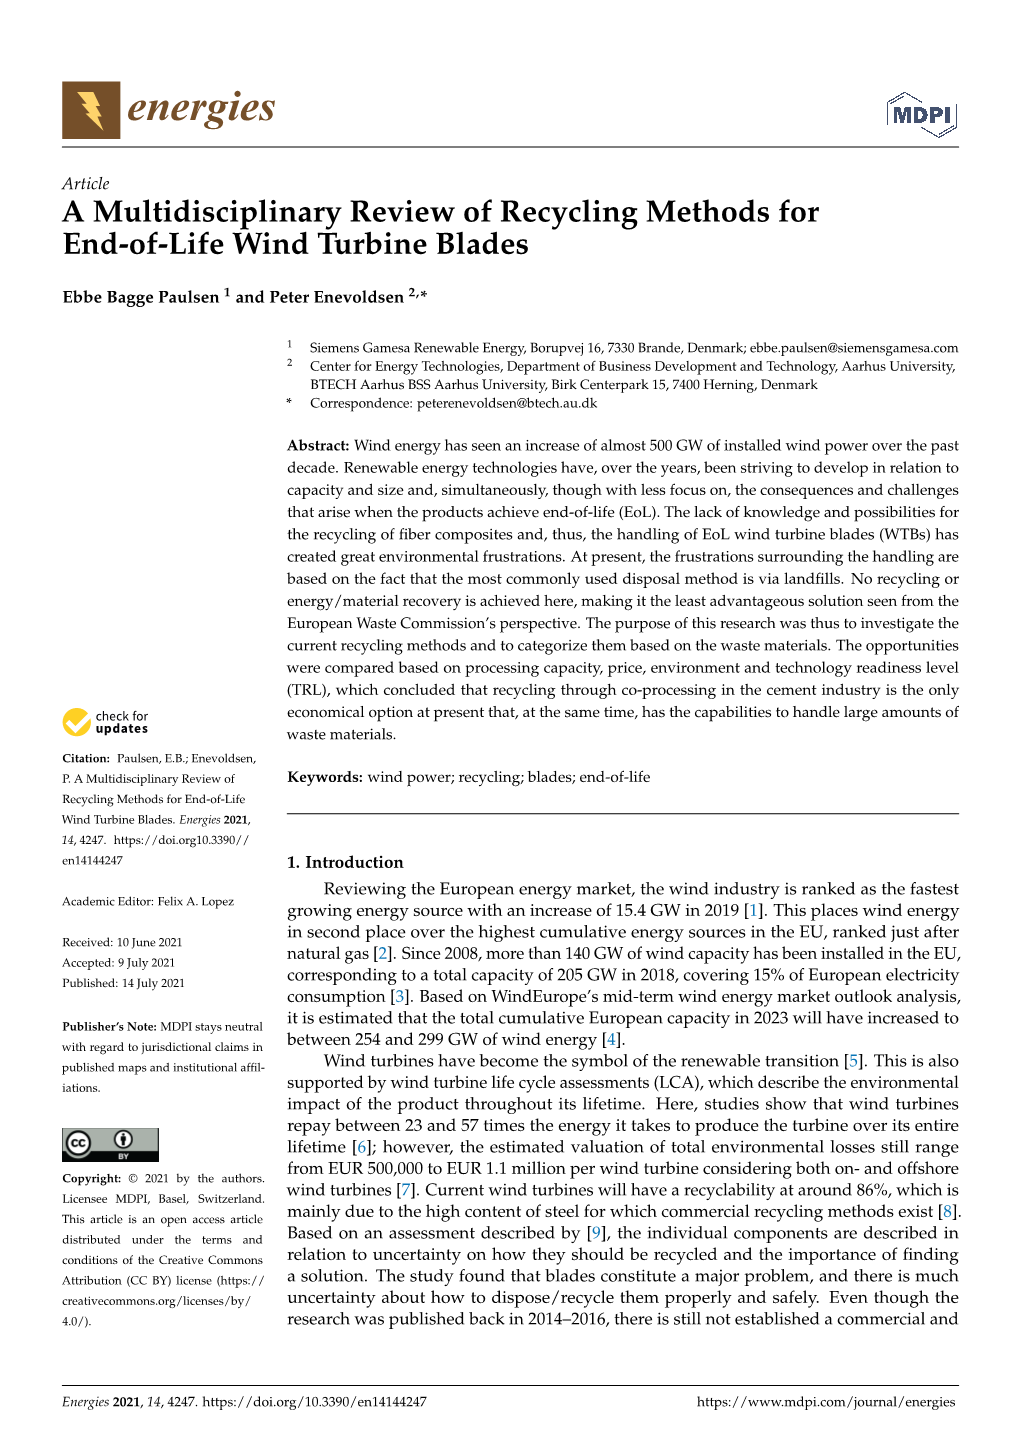 A Multidisciplinary Review of Recycling Methods for End-Of-Life Wind Turbine Blades